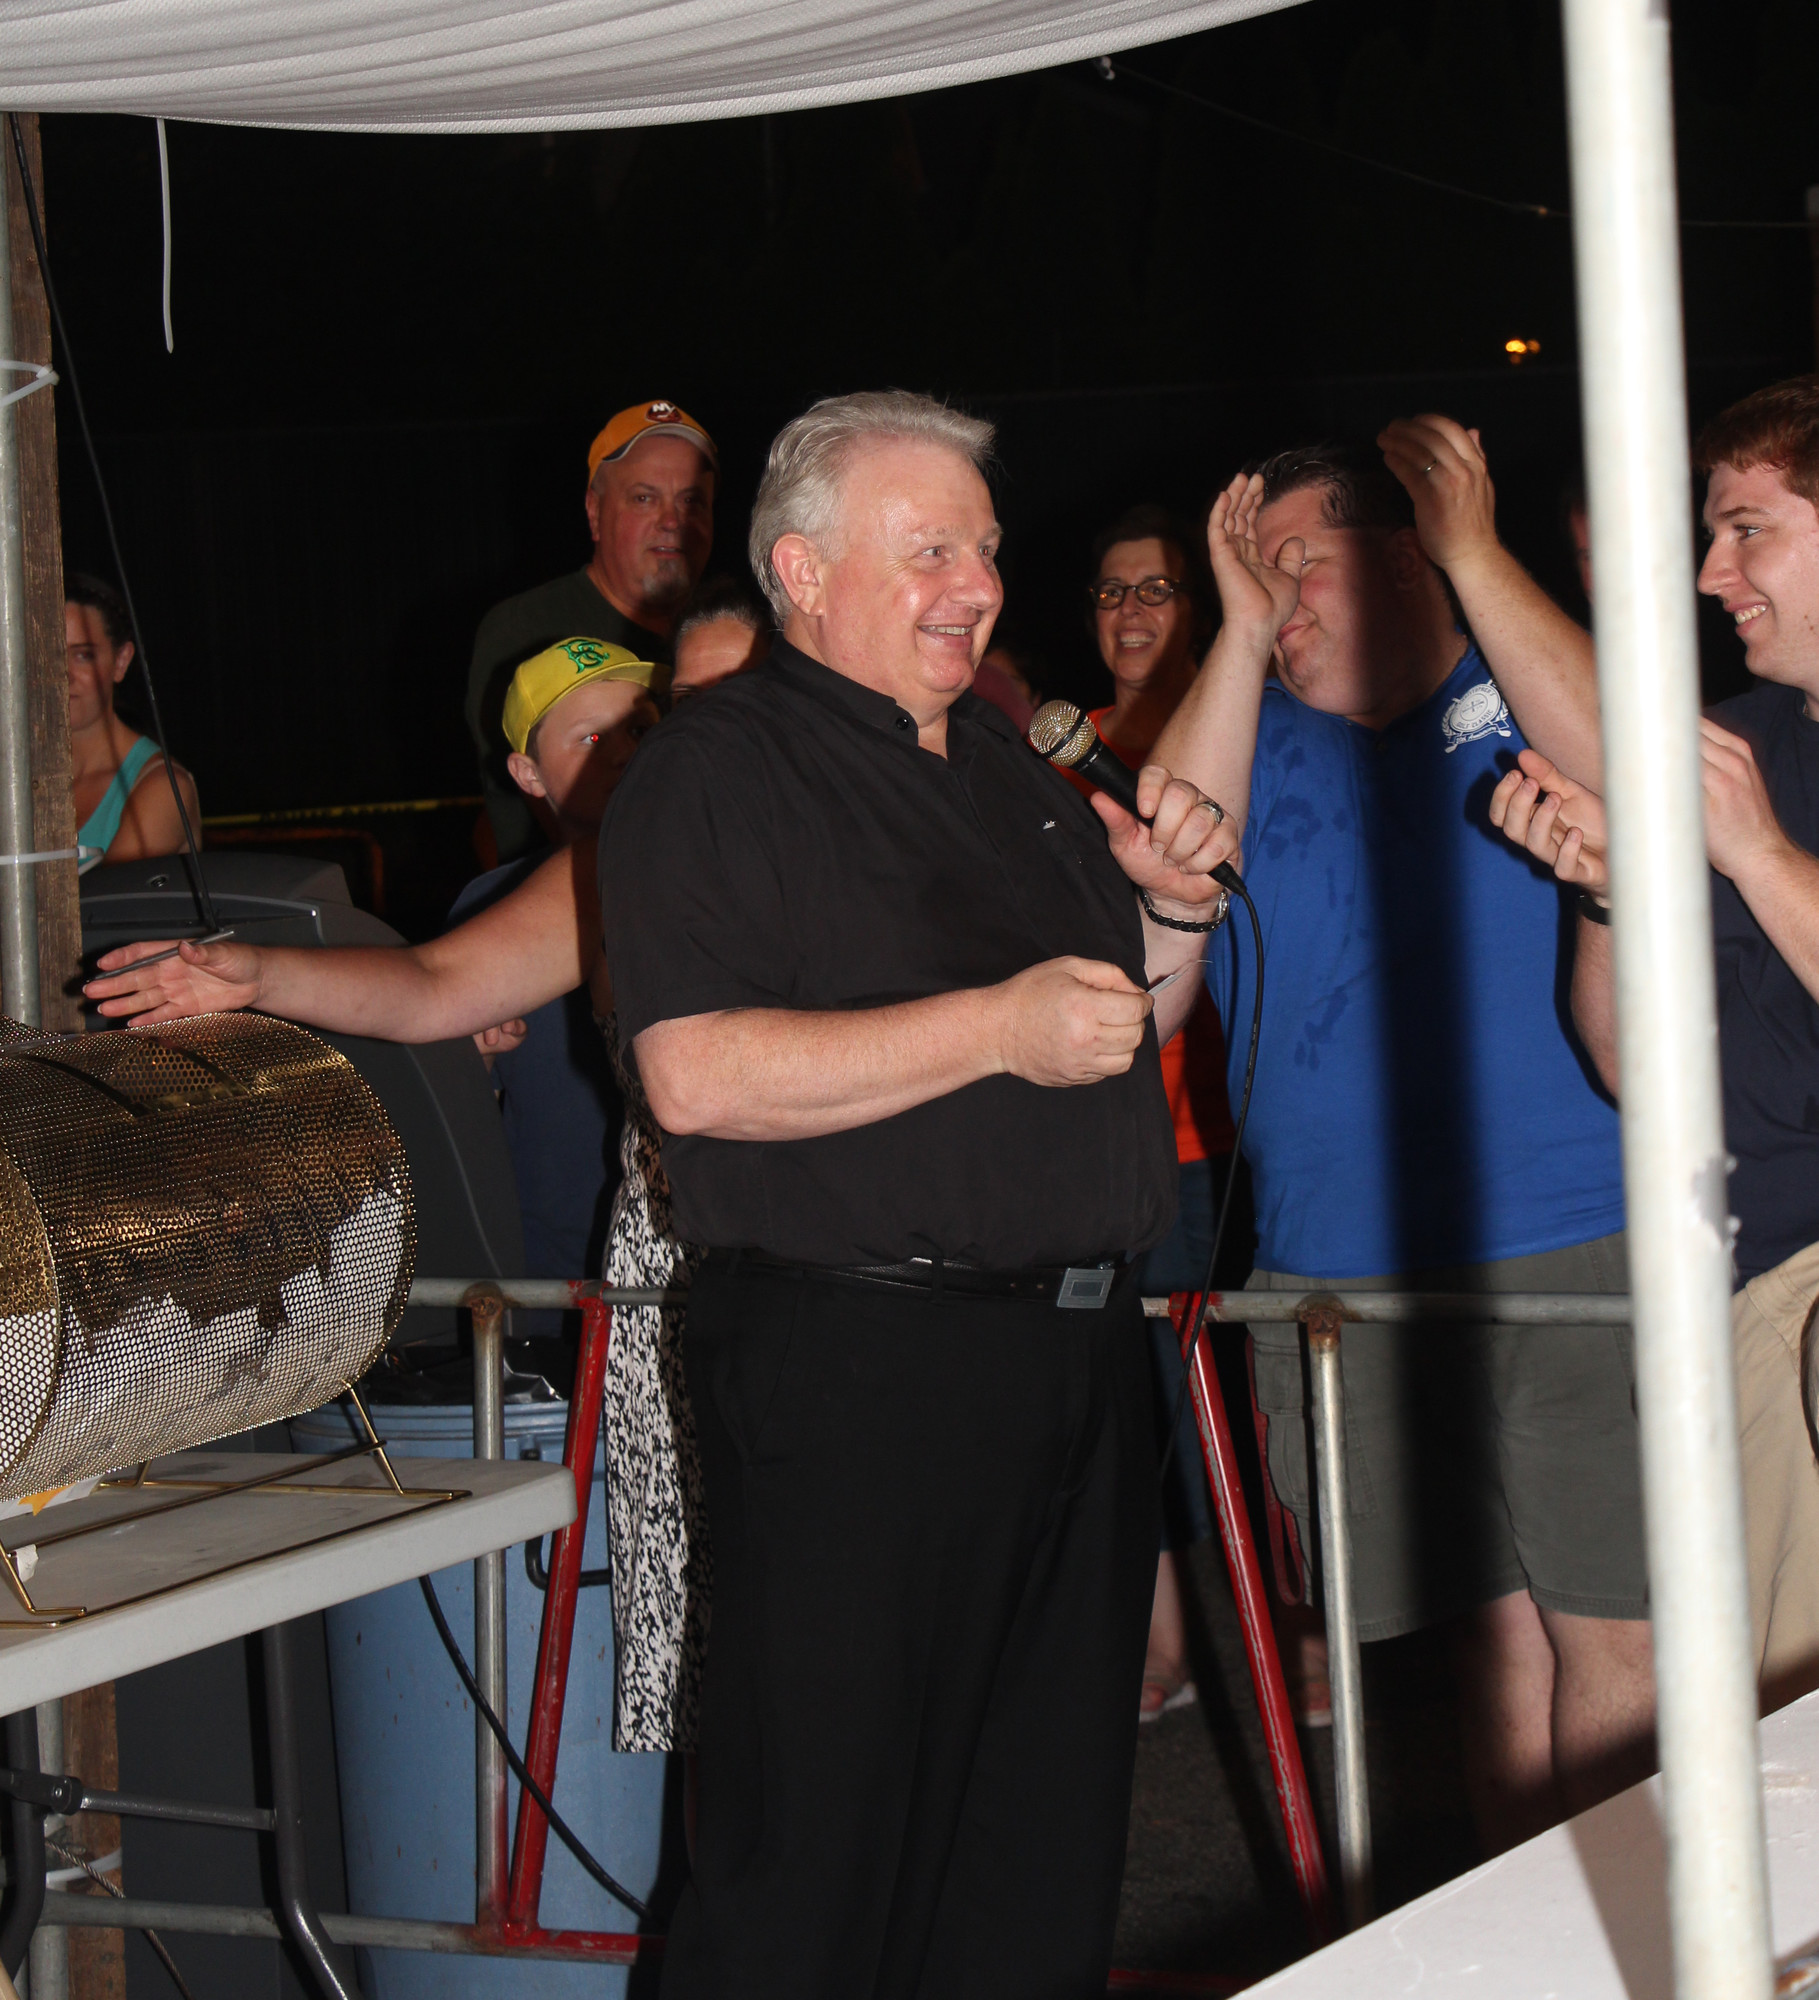 Msgr. Steven Camp picked raffle tickets as the large crowd looked on with anticipation.